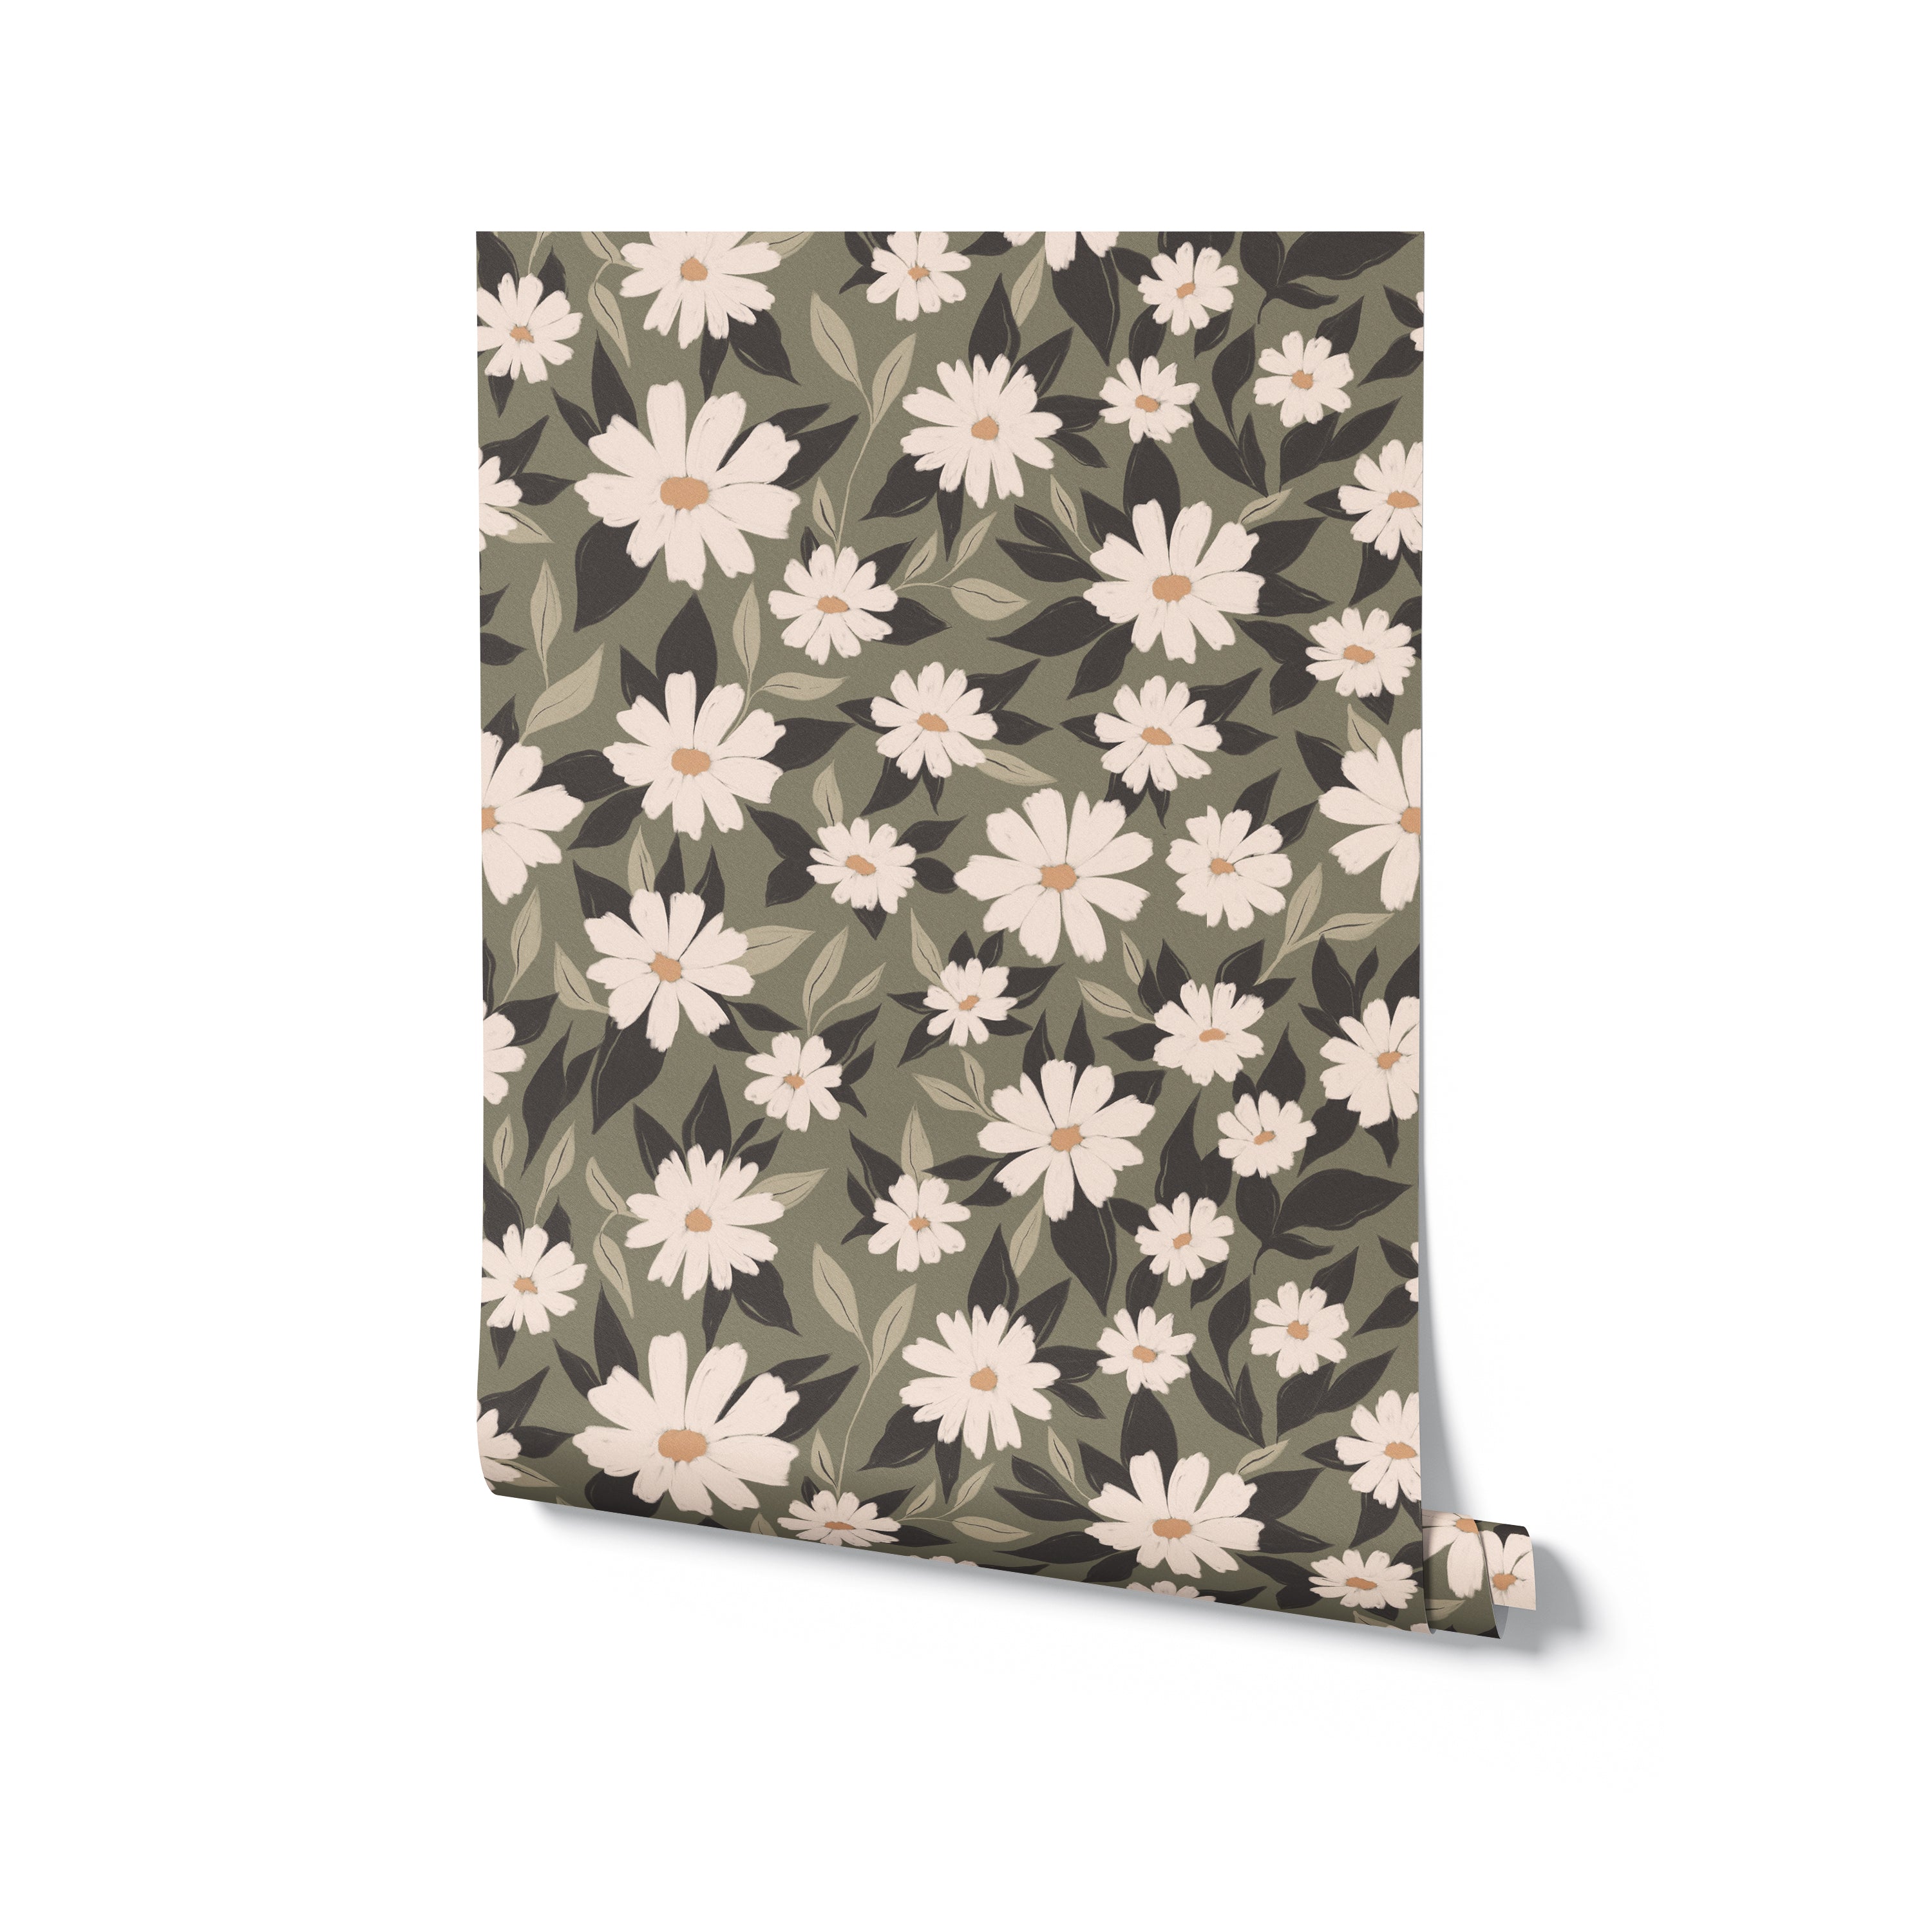 A rolled piece of "Daisy Blooms Wallpaper - 25"" displaying a lush pattern of white daisies against a deep olive background. This wallpaper brings a touch of nature indoors, perfect for adding a serene and decorative element to both modern and traditional home decors.